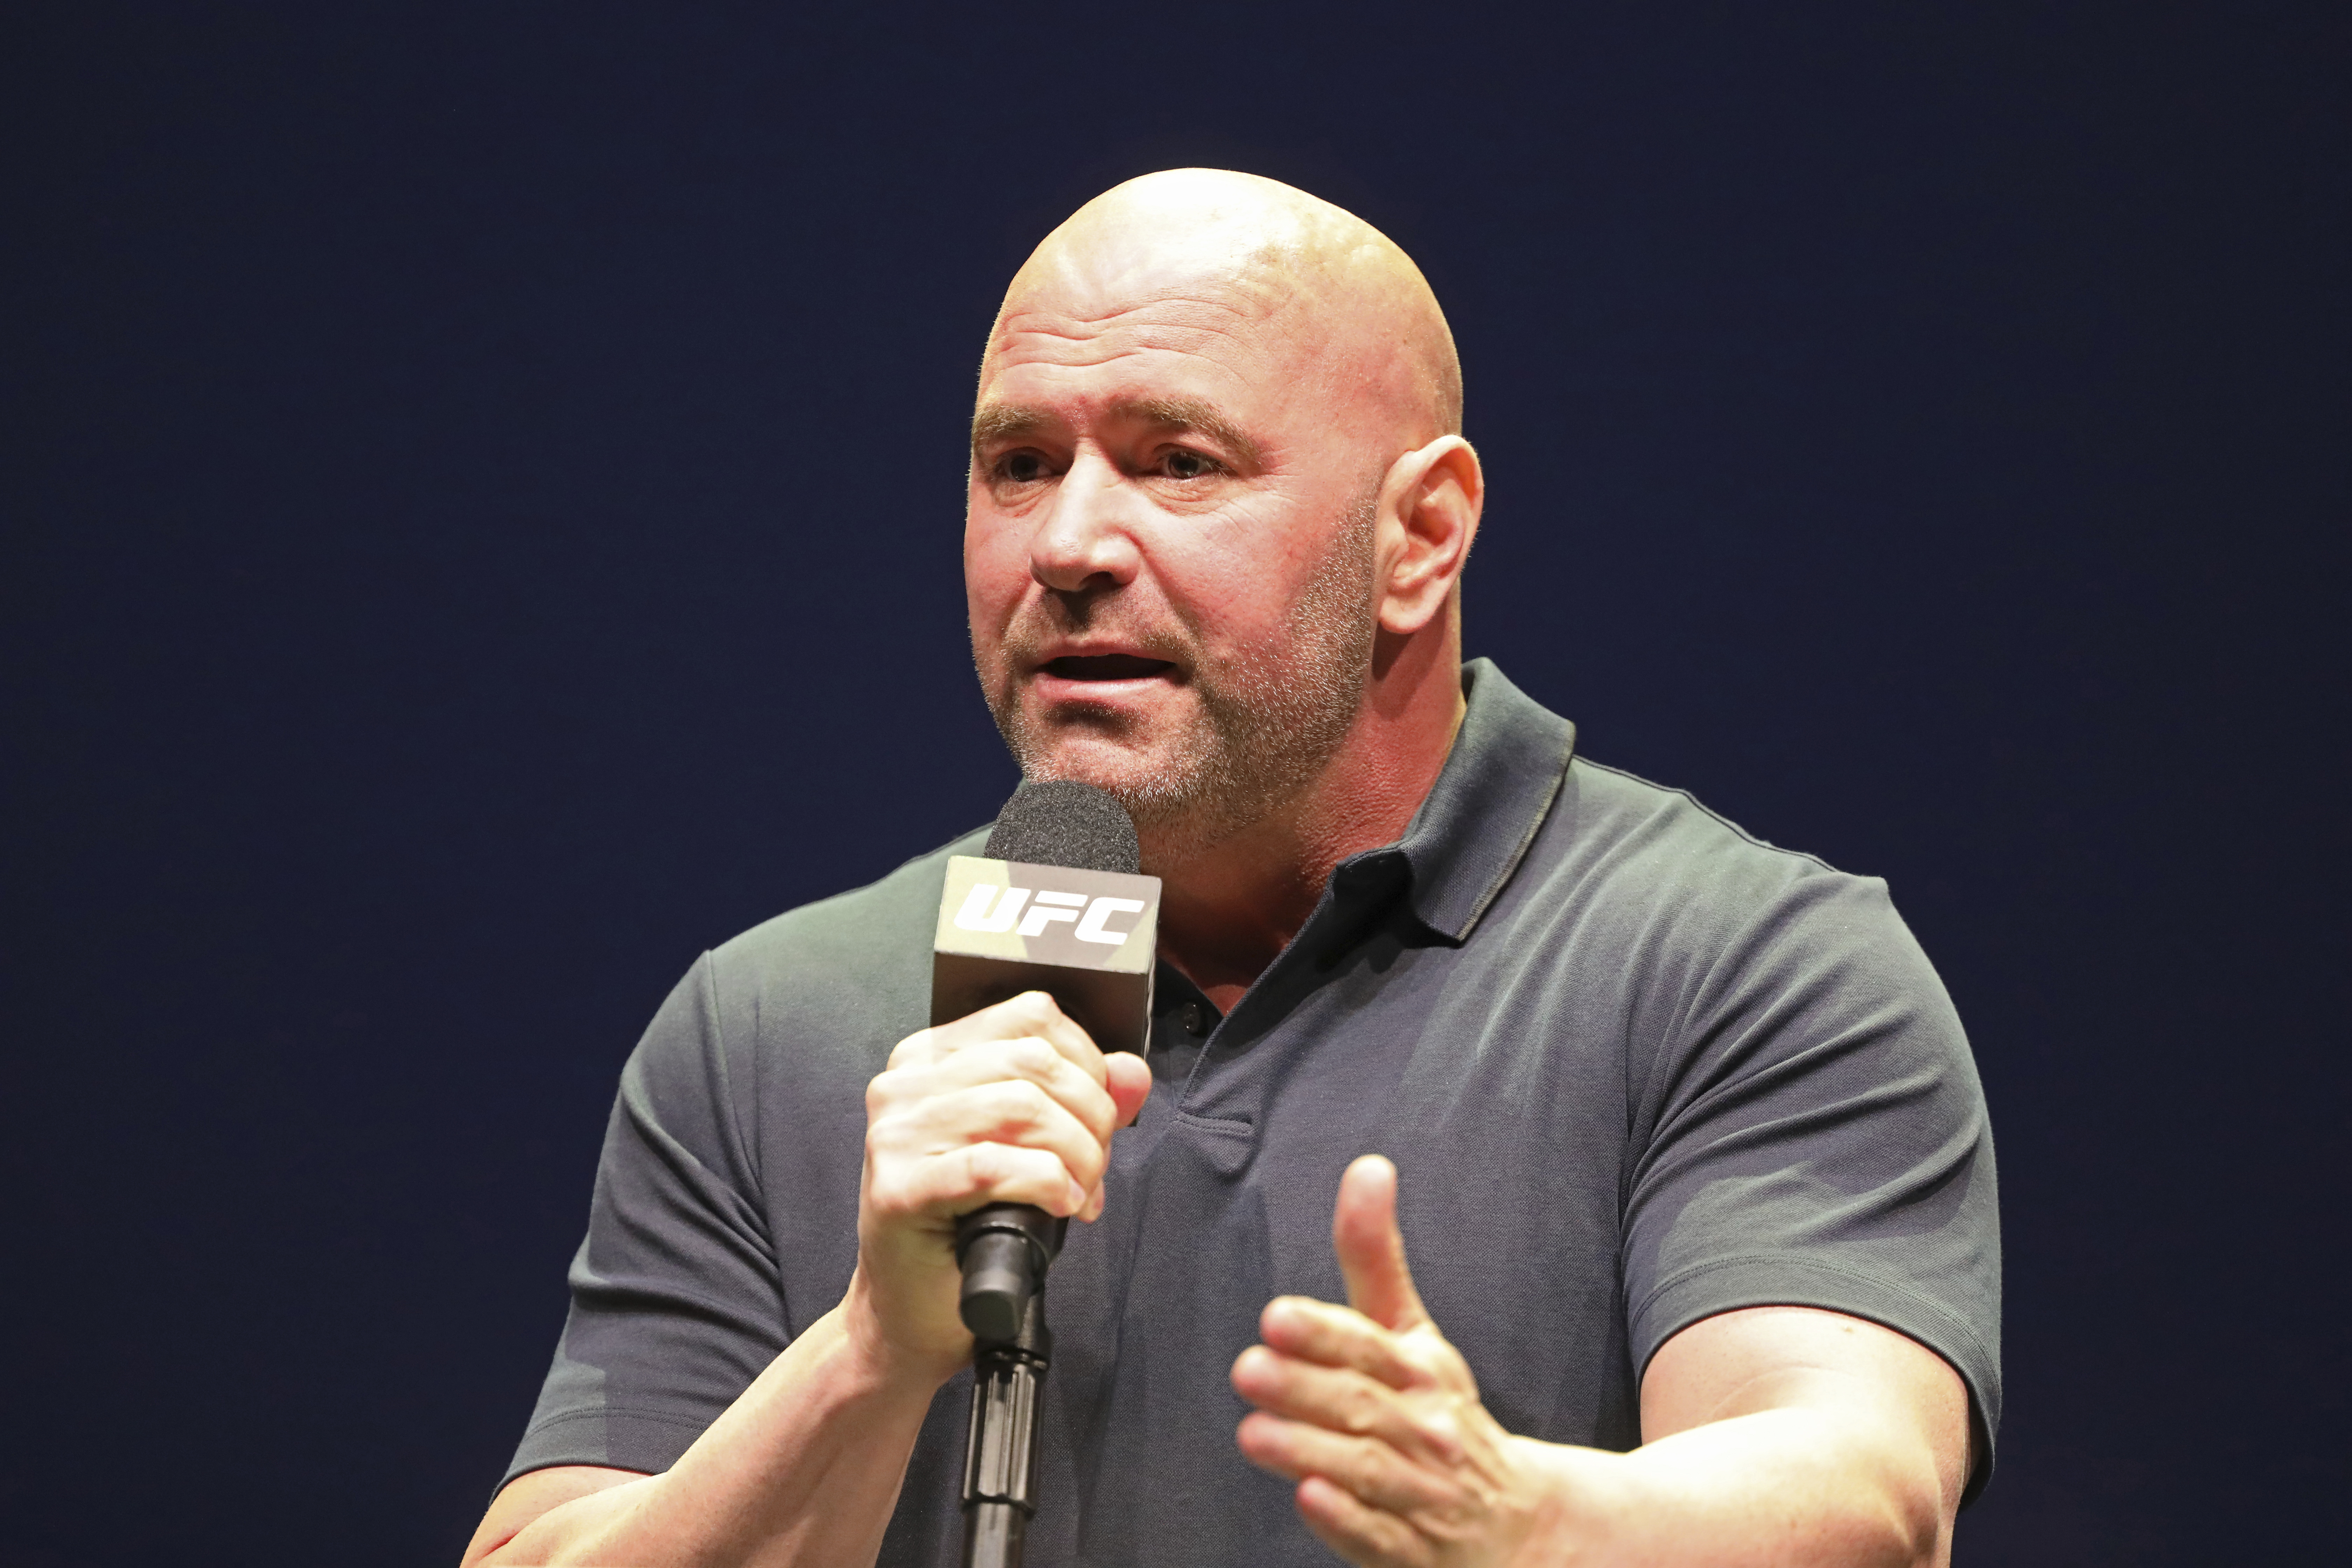 UFC President Dana White Reveals His Entire Family Tested Positive for COVID-19